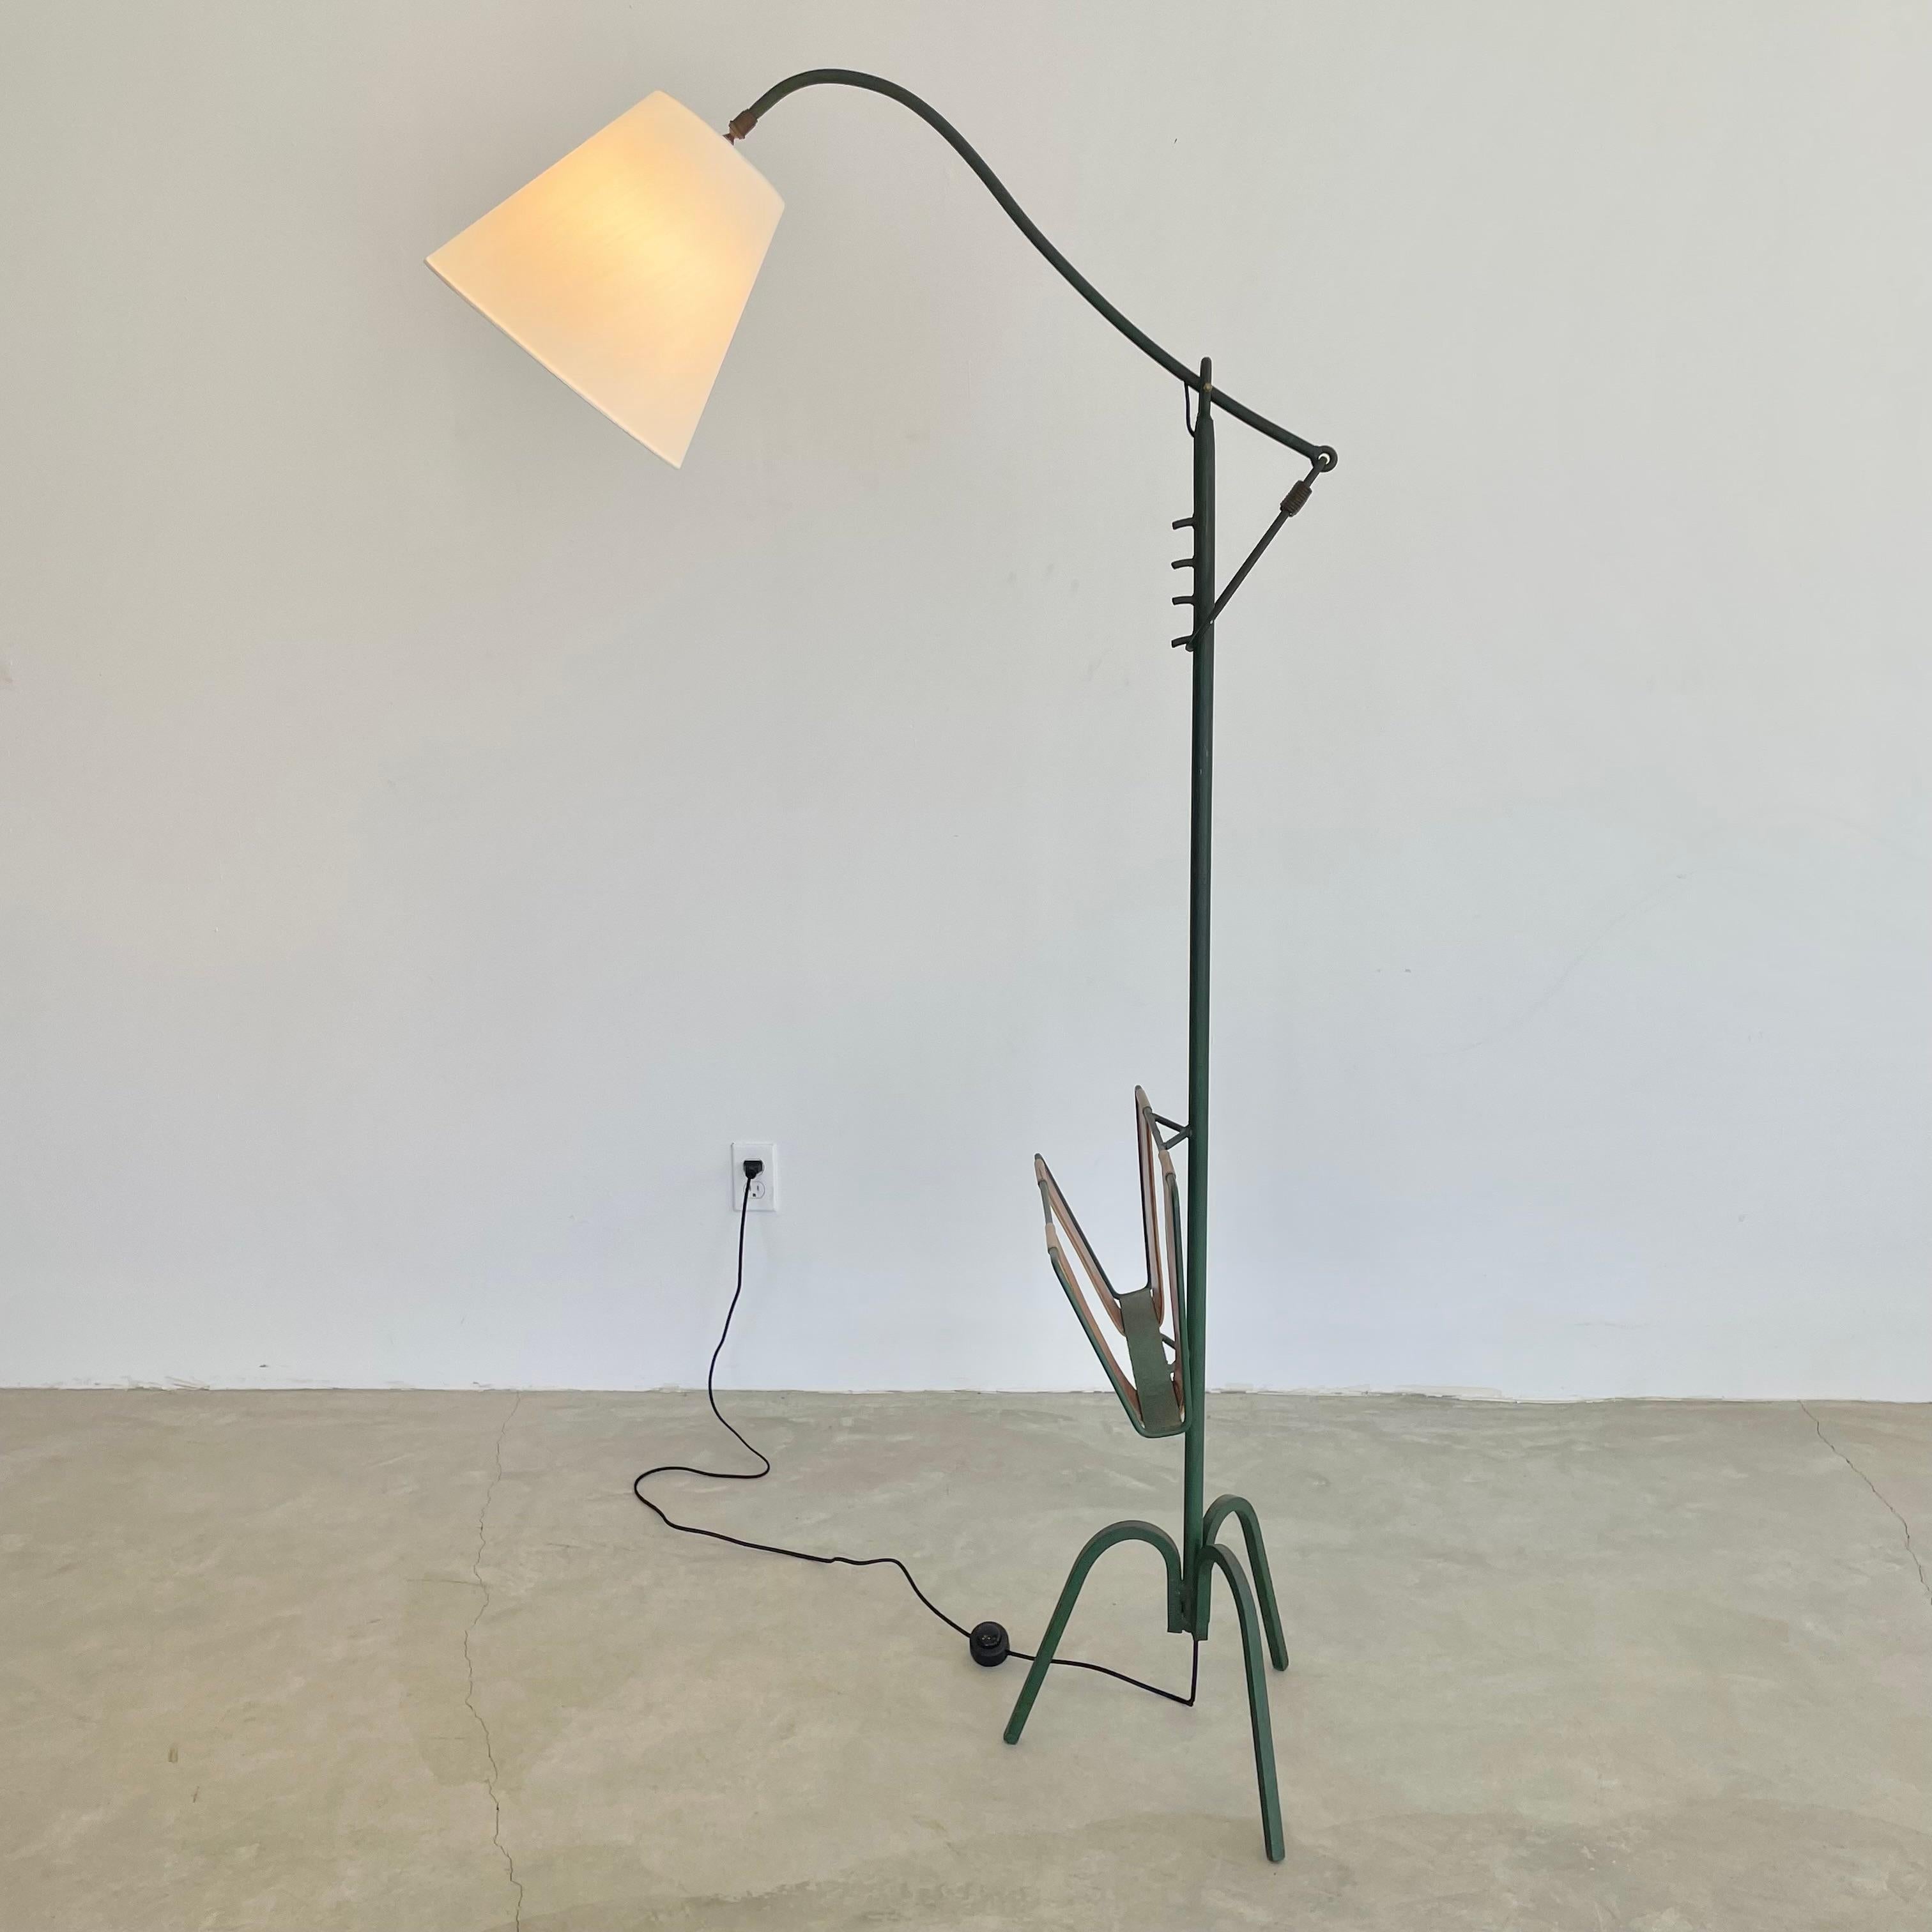 Mid-20th Century Adjustable Iron Floor Lamp in the style of Jacques Adnet, 1950s France For Sale